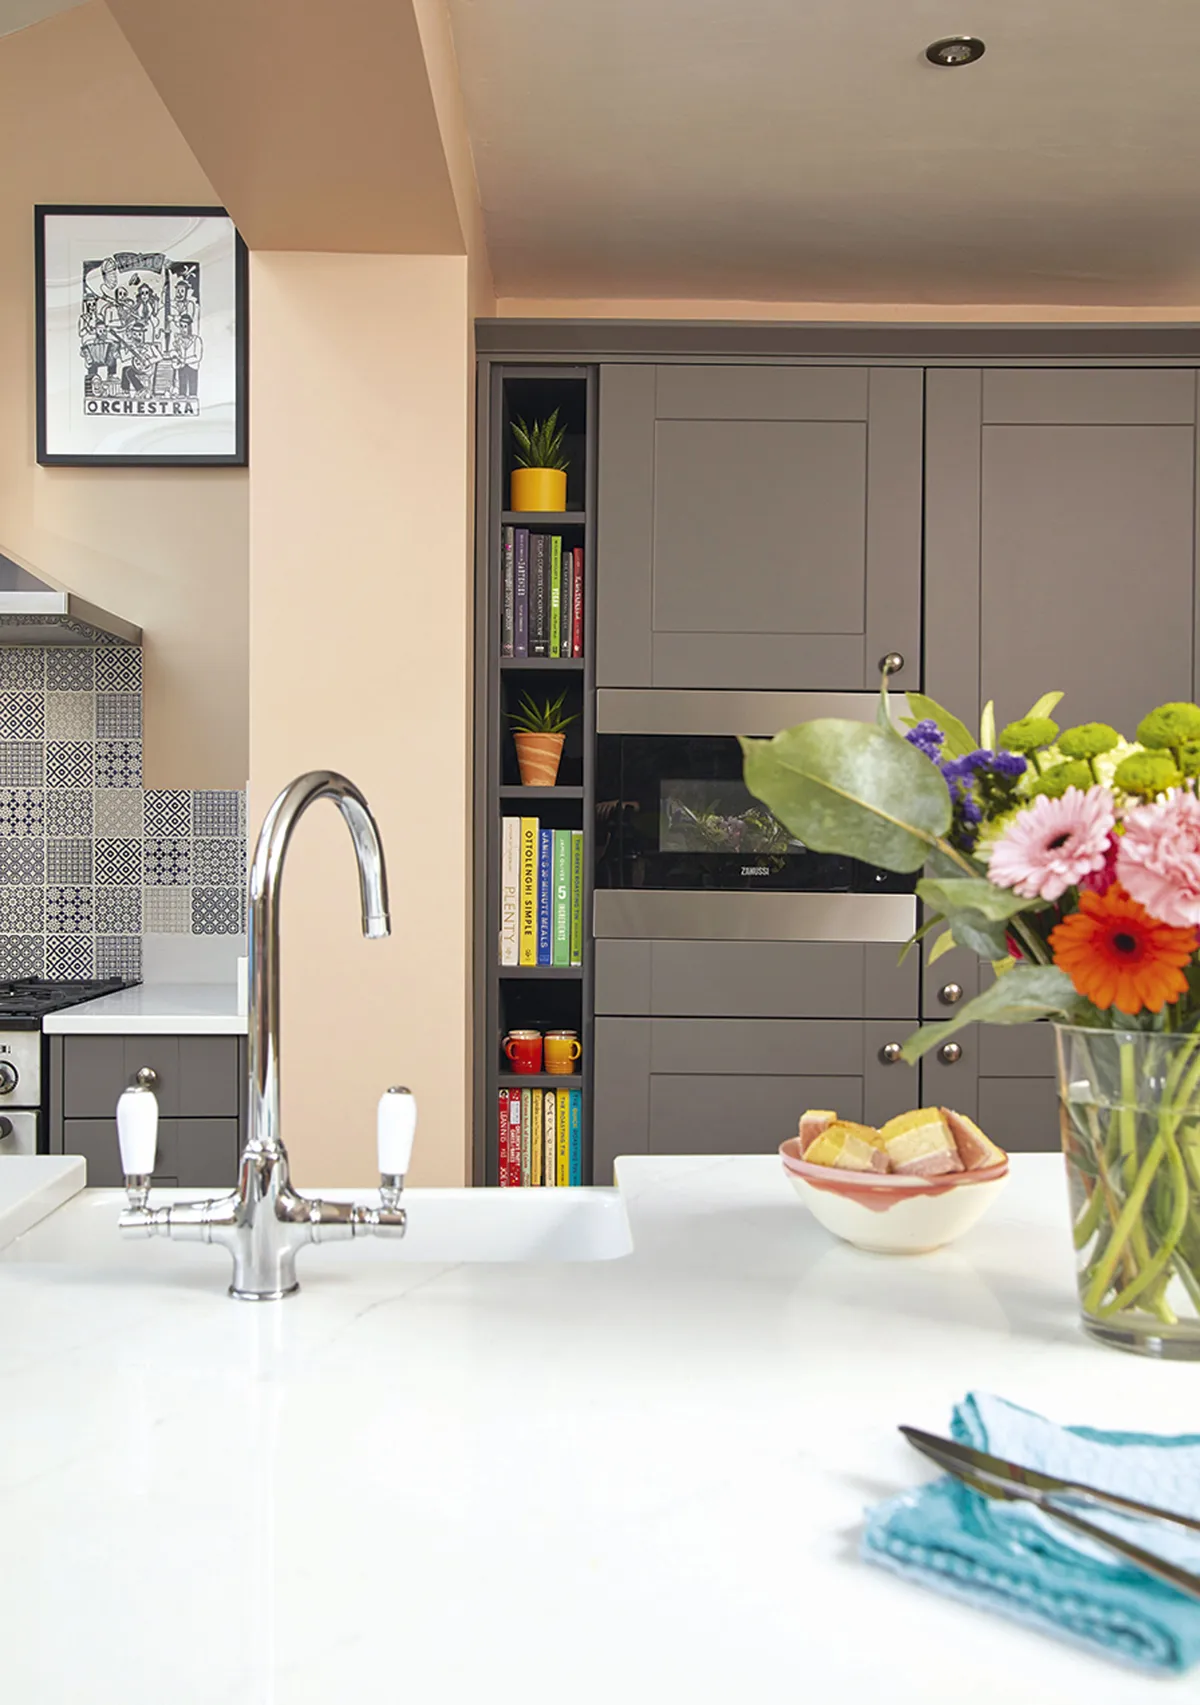 Kitchen makeover: 'We turned three rooms into one!'